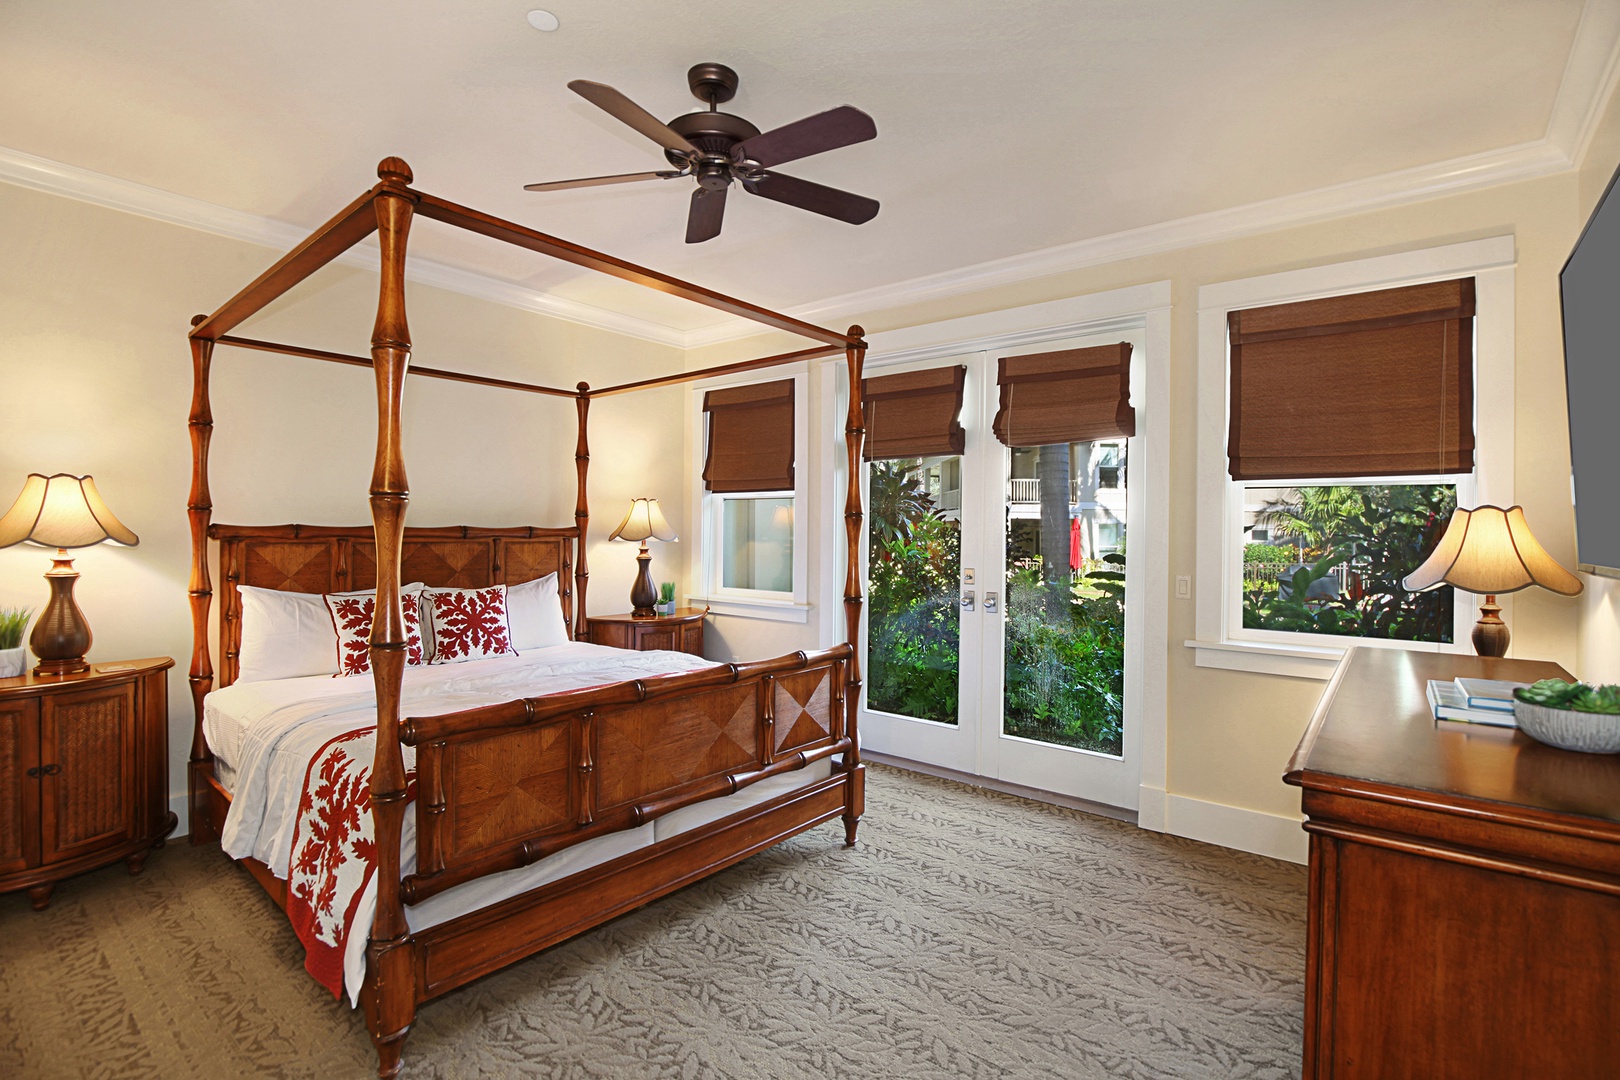 Koloa Vacation Rentals, Villas at Poipu Kai B111 - The primary bedroom at Unit B111 features a four-poster bed, direct access to a lanai, and a luxurious en suite bathroom with a deep soaking tub and dual vanities.